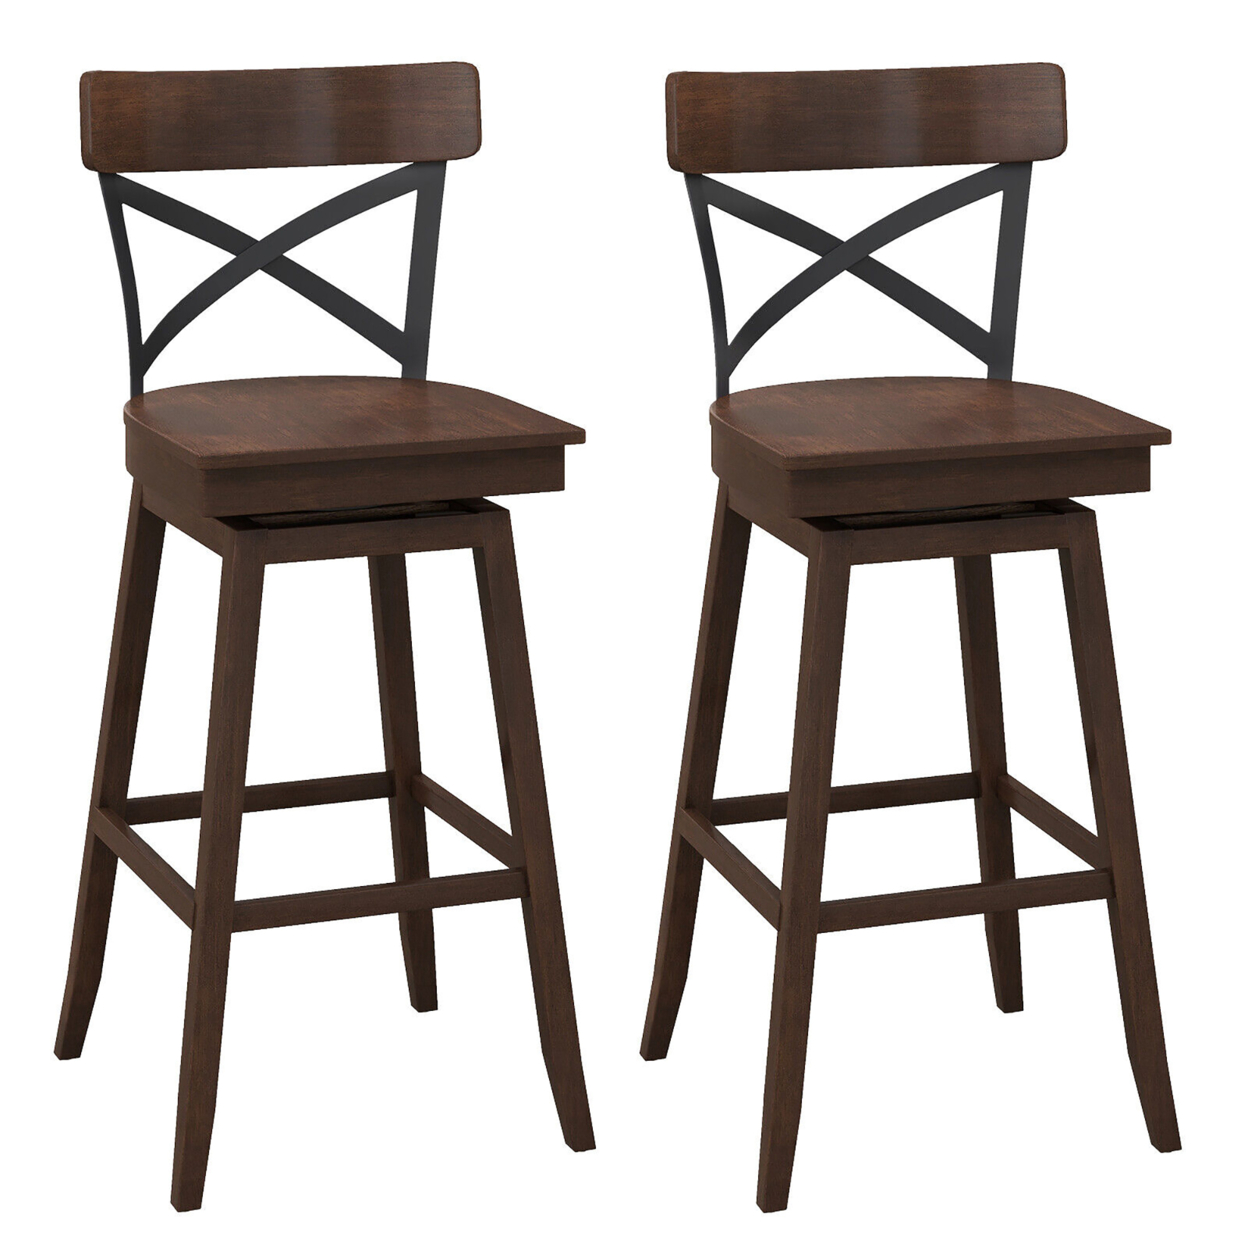 Set Of 2 Wooden Swivel Bar Stools Bar Height Kitchen Chairs W/ Back Brown